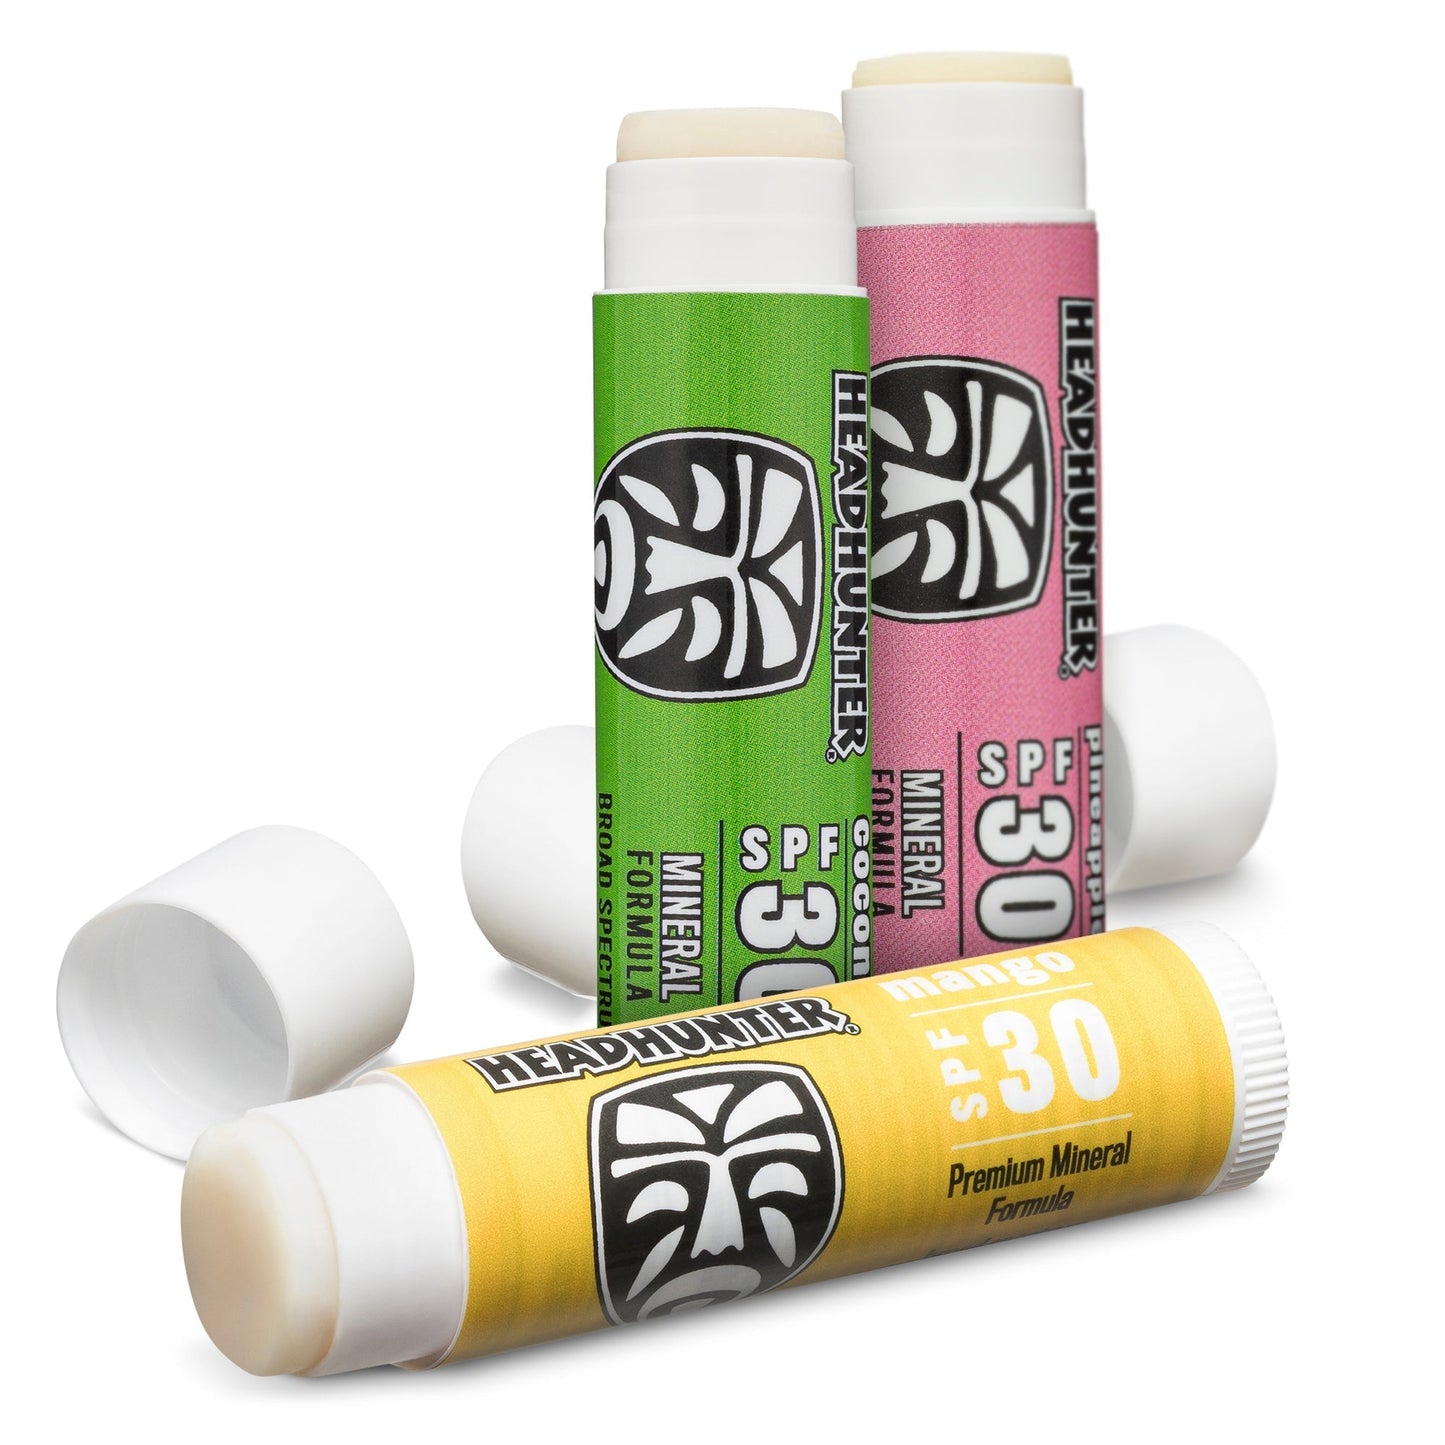 Lip Balm - SPF 30, Assorted Flavors - 12 Pack